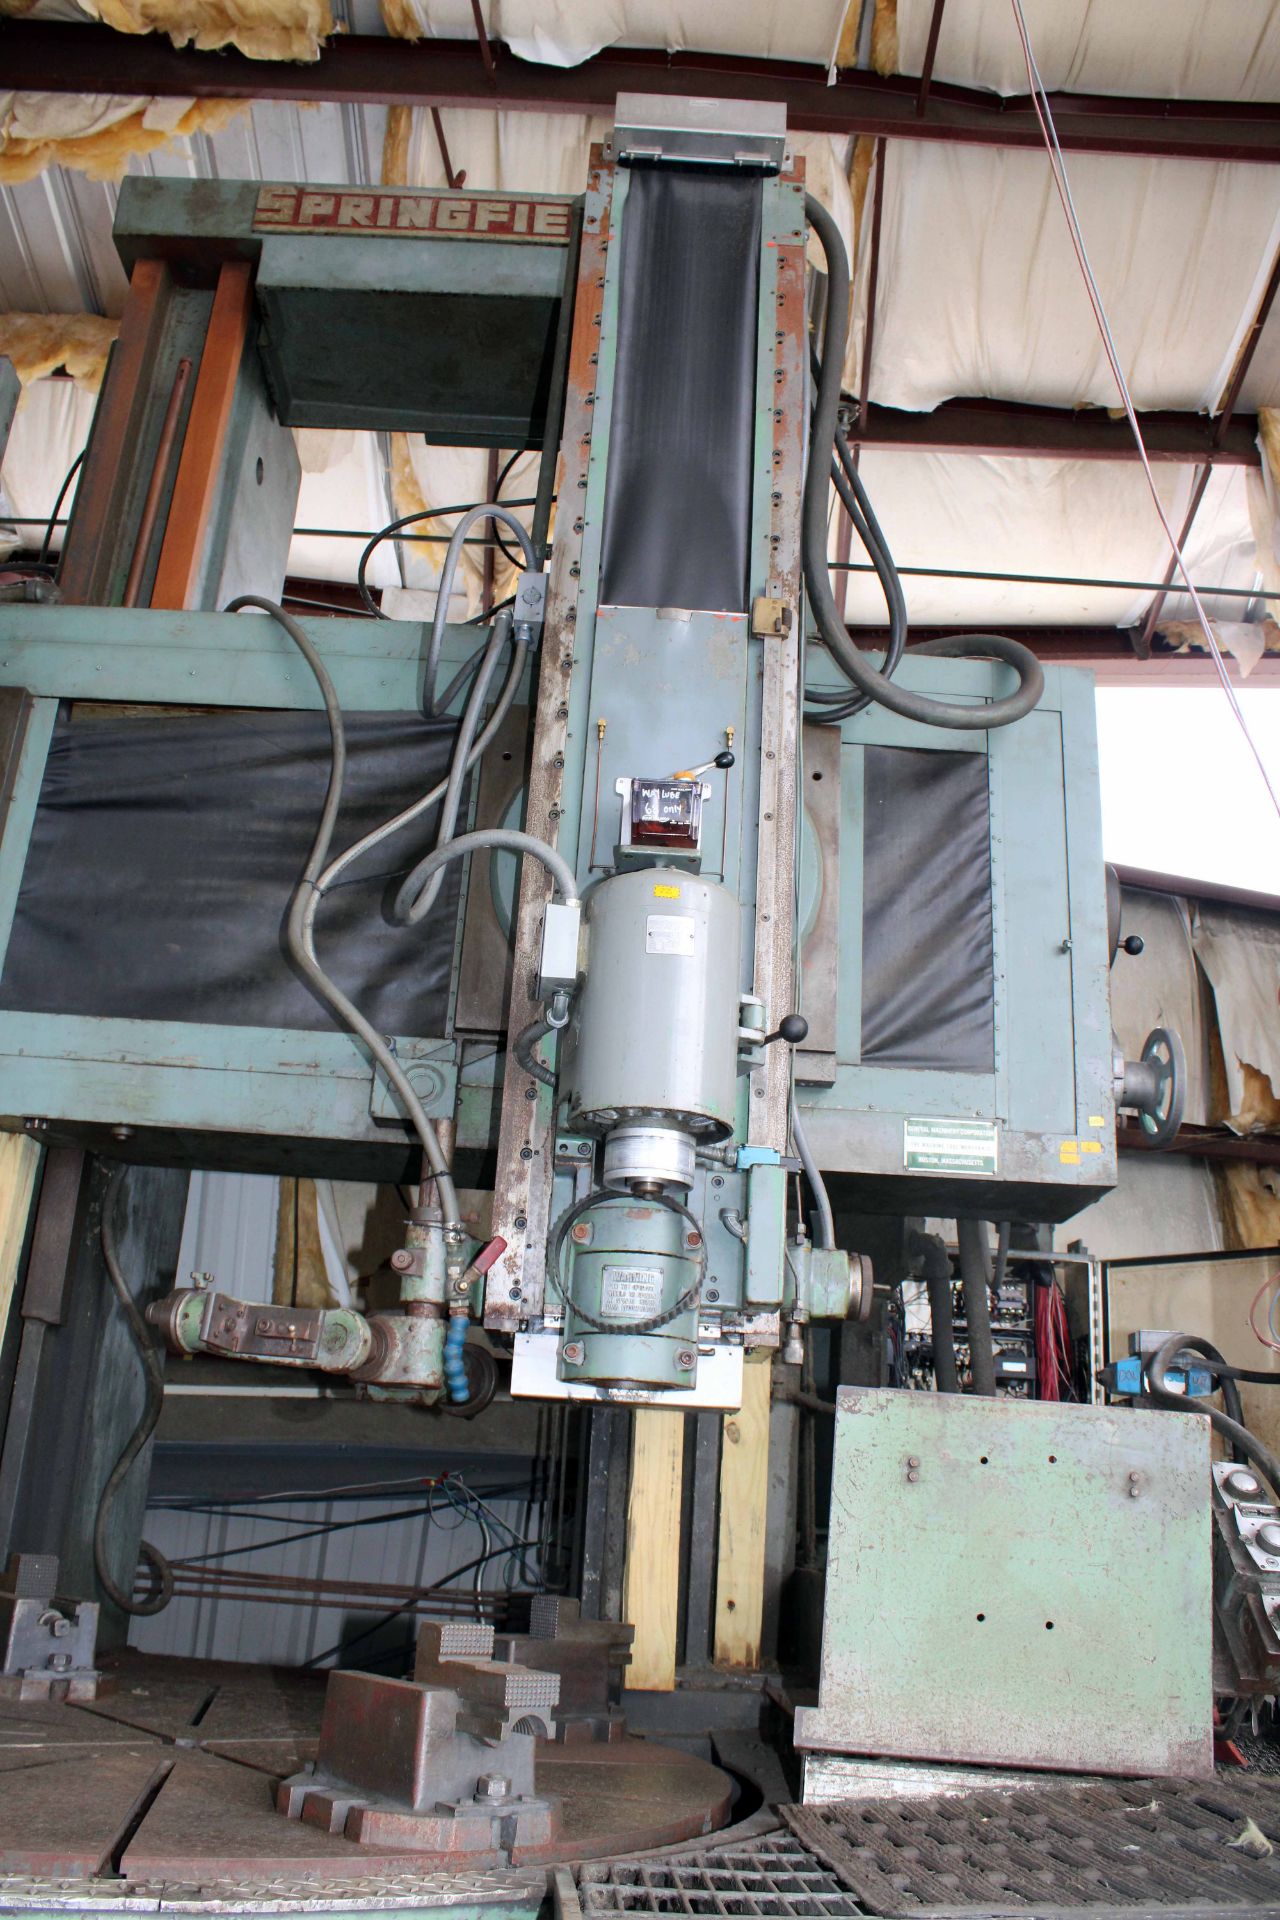 UNIVERSAL VERTICAL GRINDER, SPRINGFIELD MDL. 3-1/2TR ADJUSTABLE RAIL STYLE, 68" swing, 62" table - Image 2 of 8